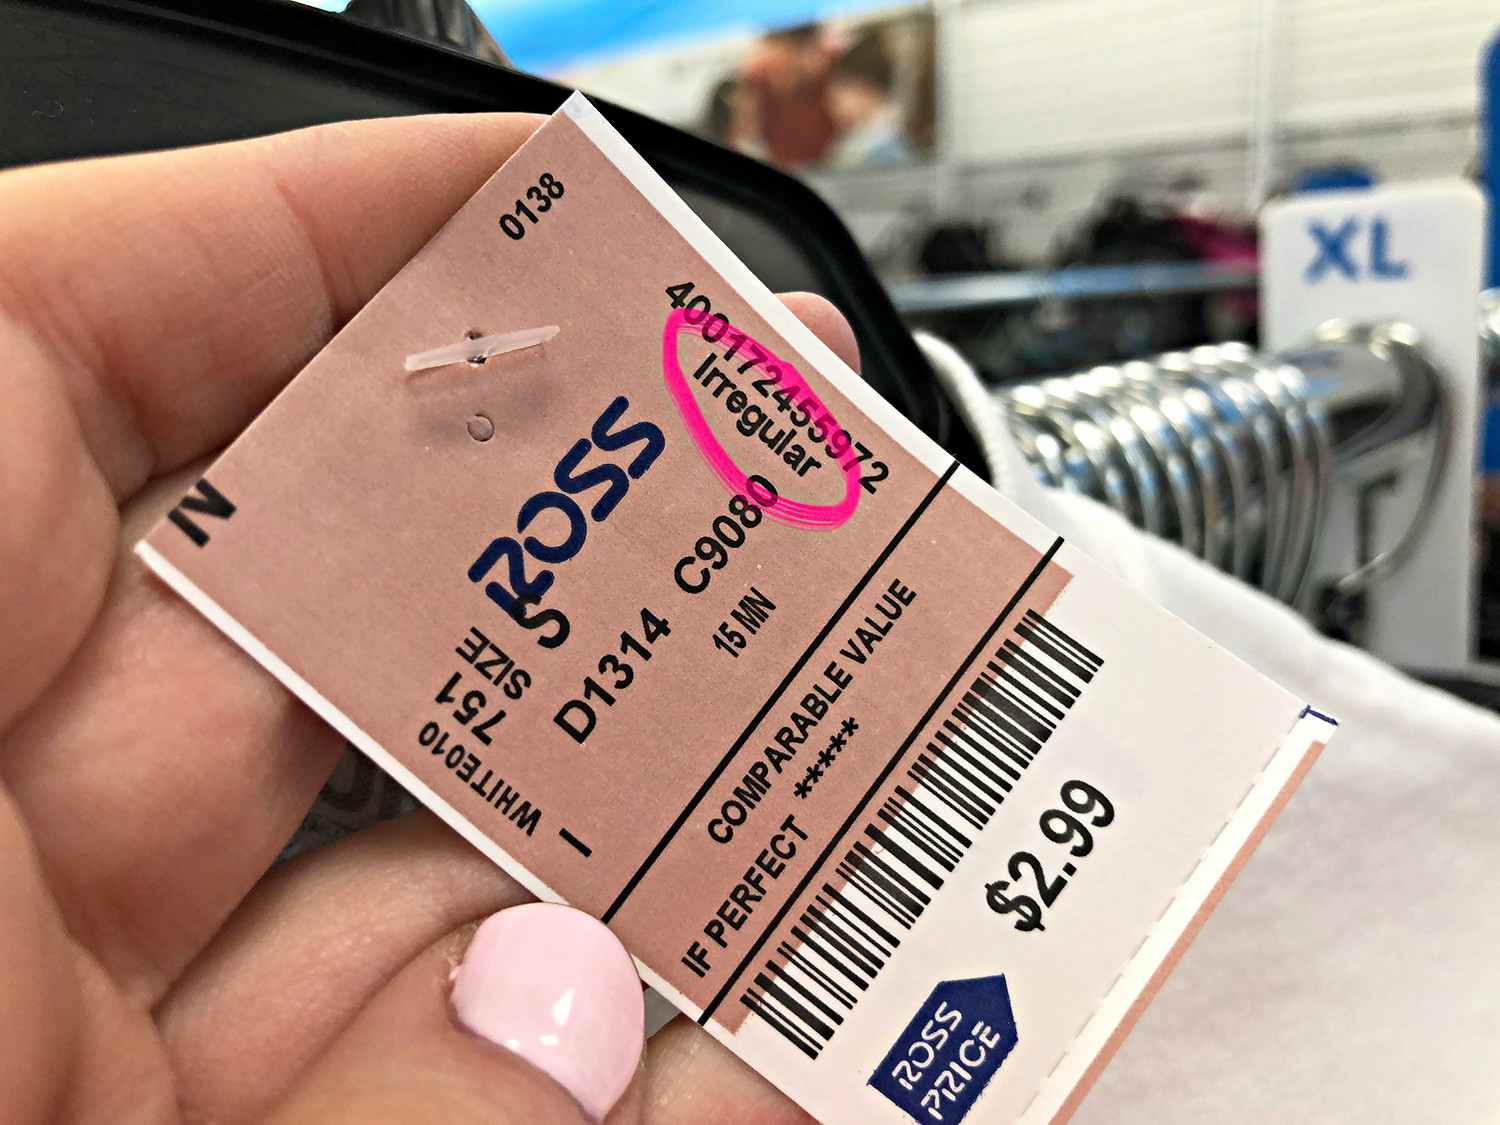 All irregular or defective items are marked at Ross.